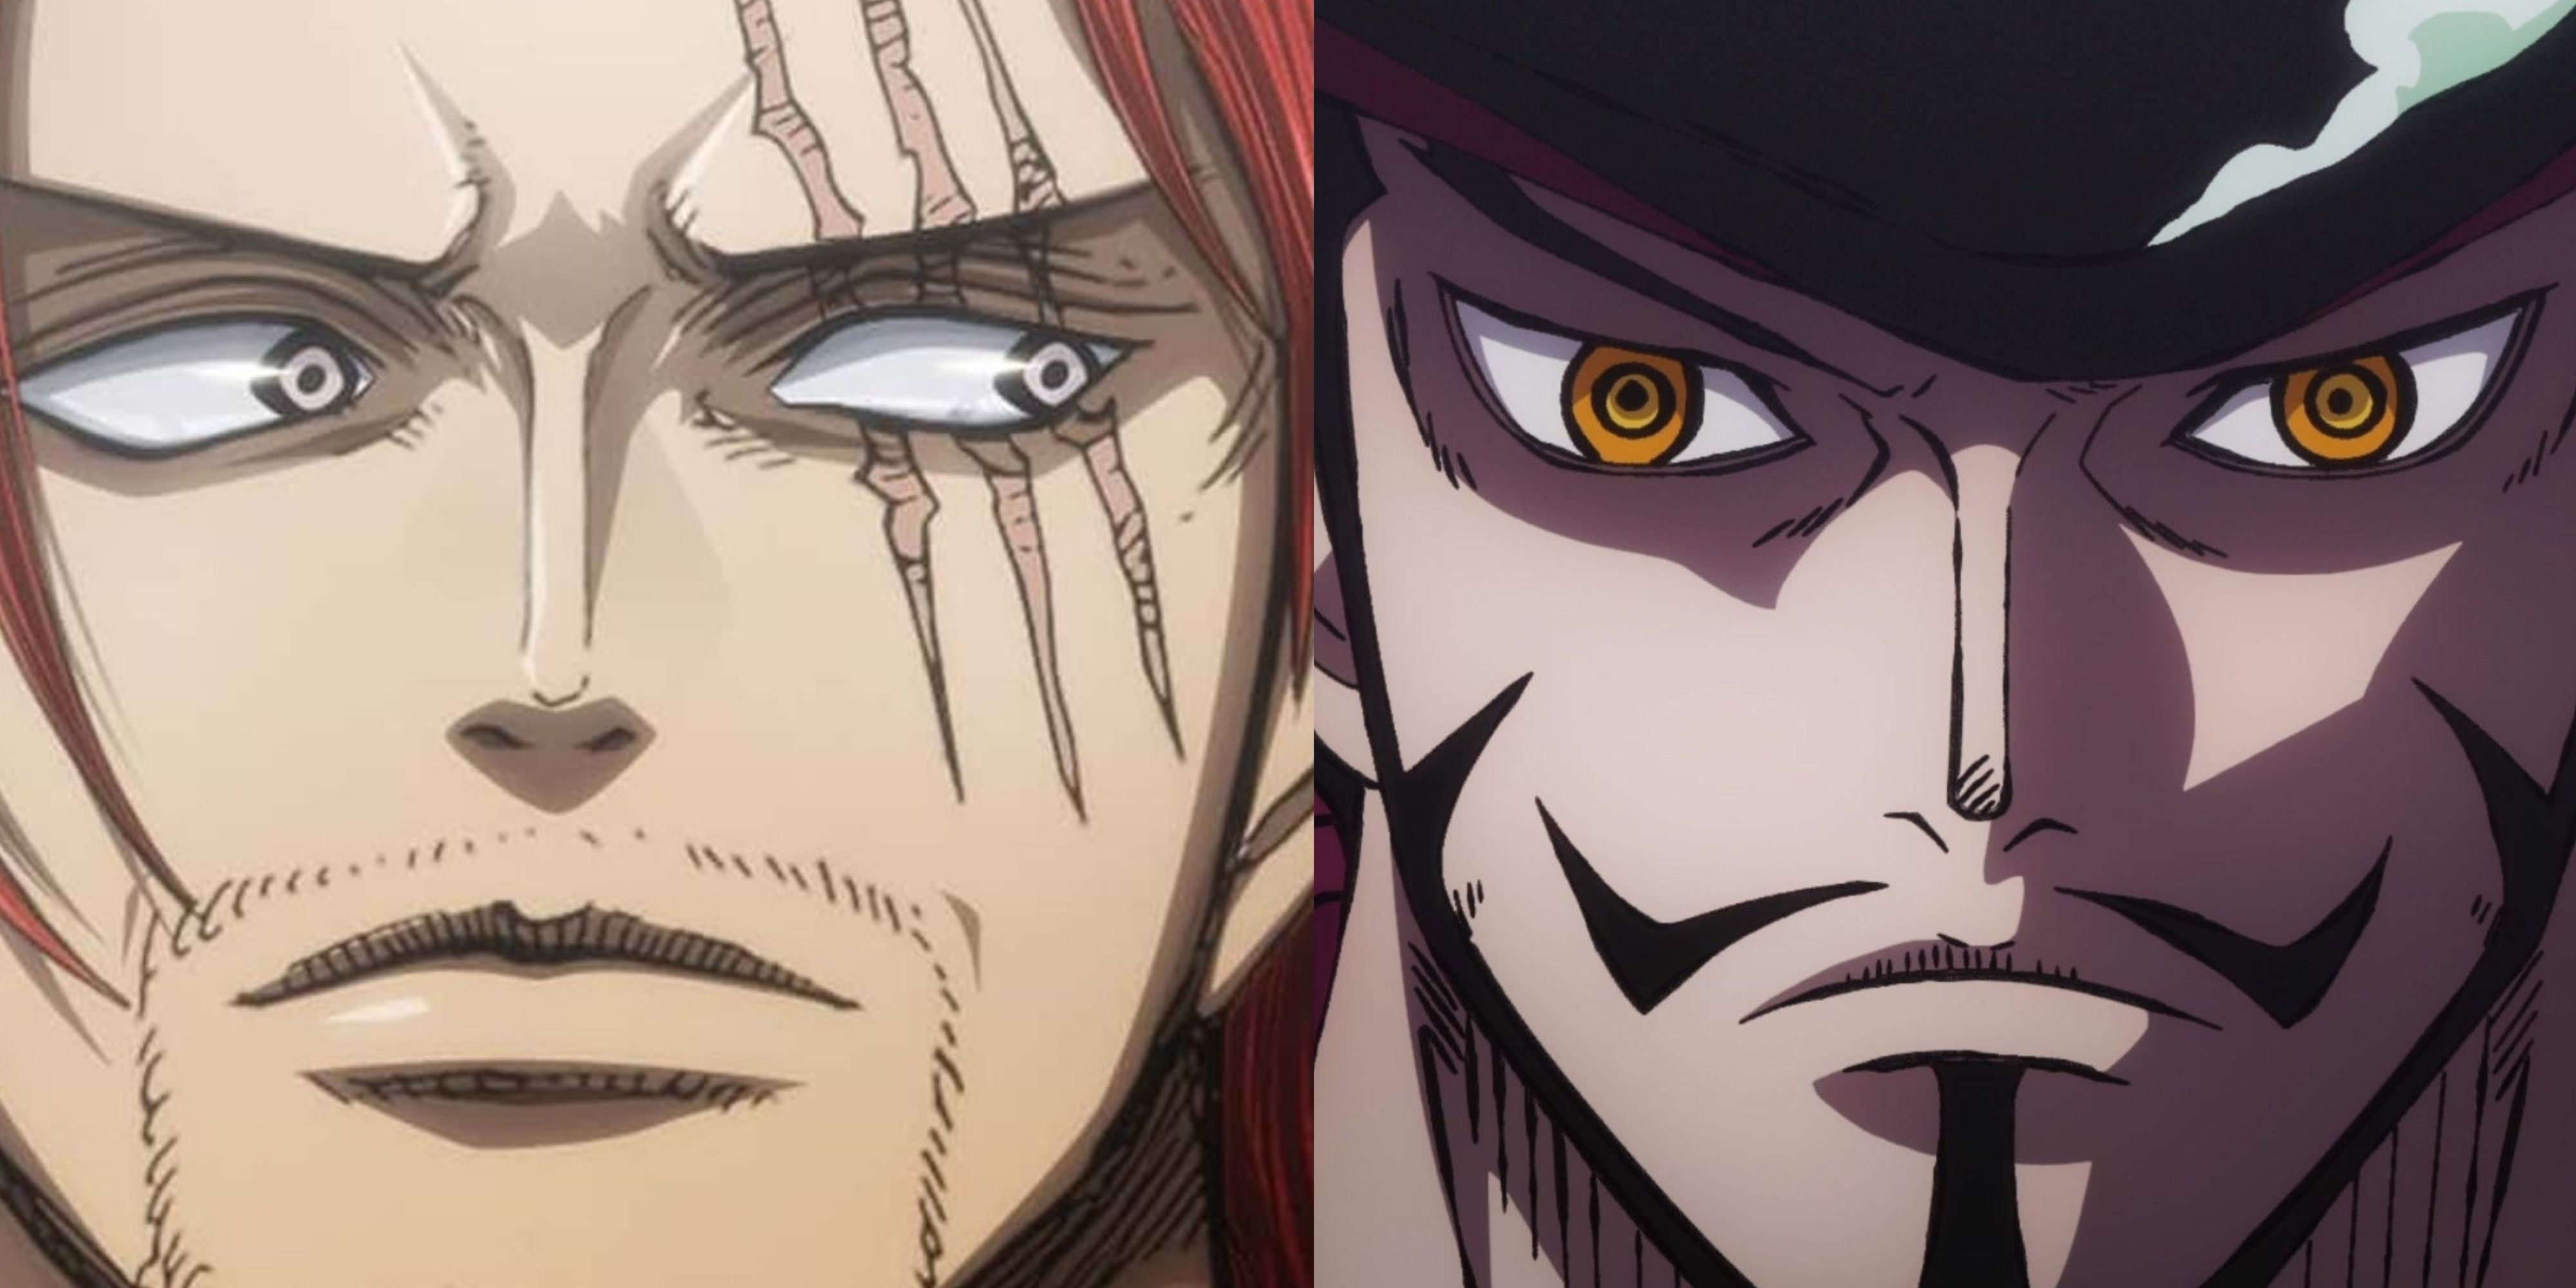 Featured One Piece Strongest Characters Final War Mihawk Shanks